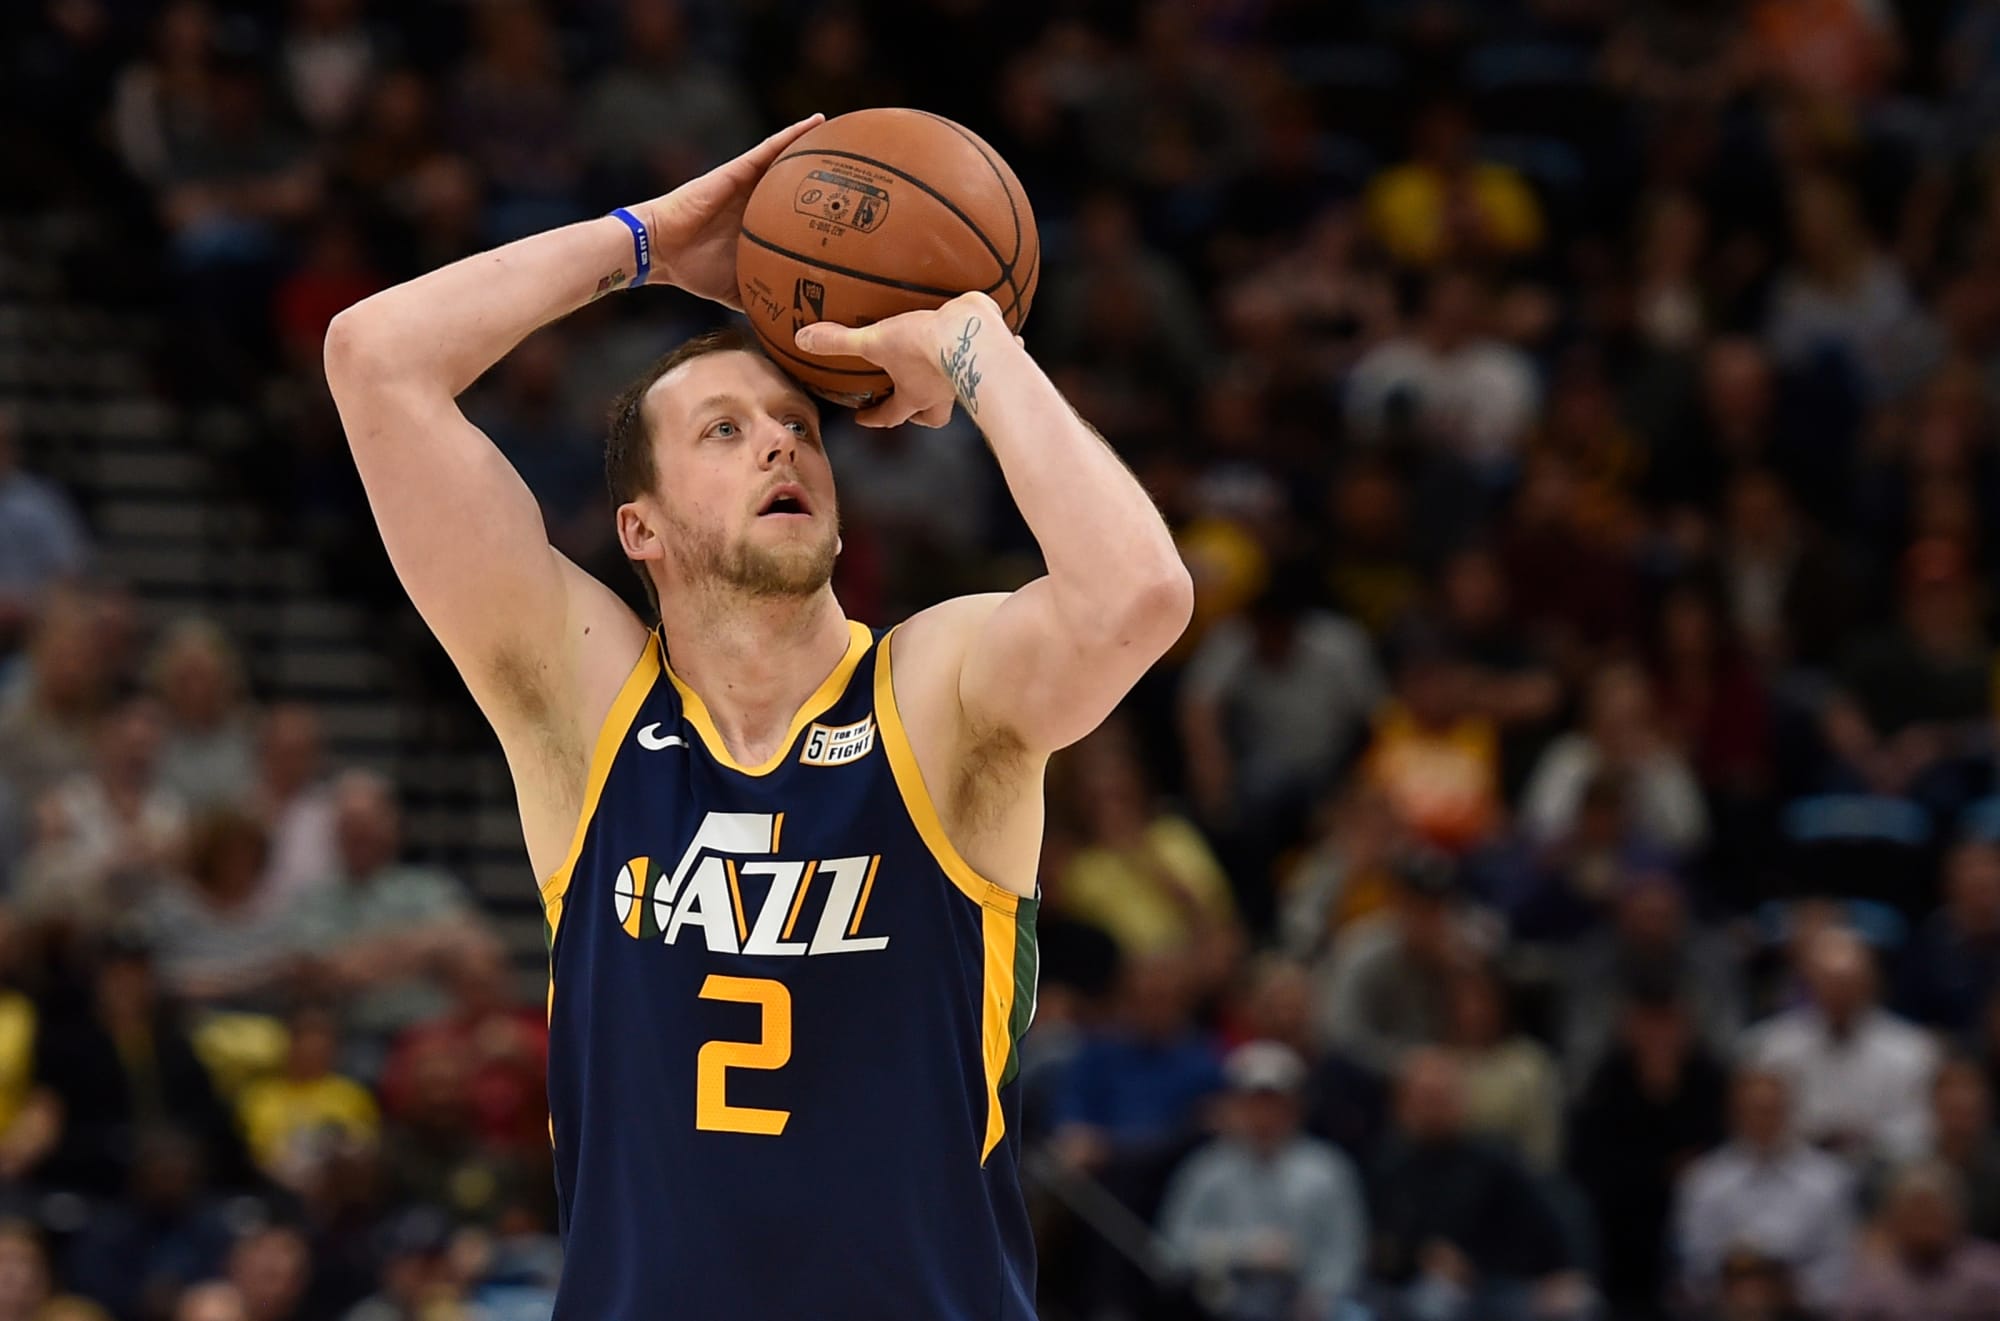 What Does Ally Mean on Joe Ingles Jersey